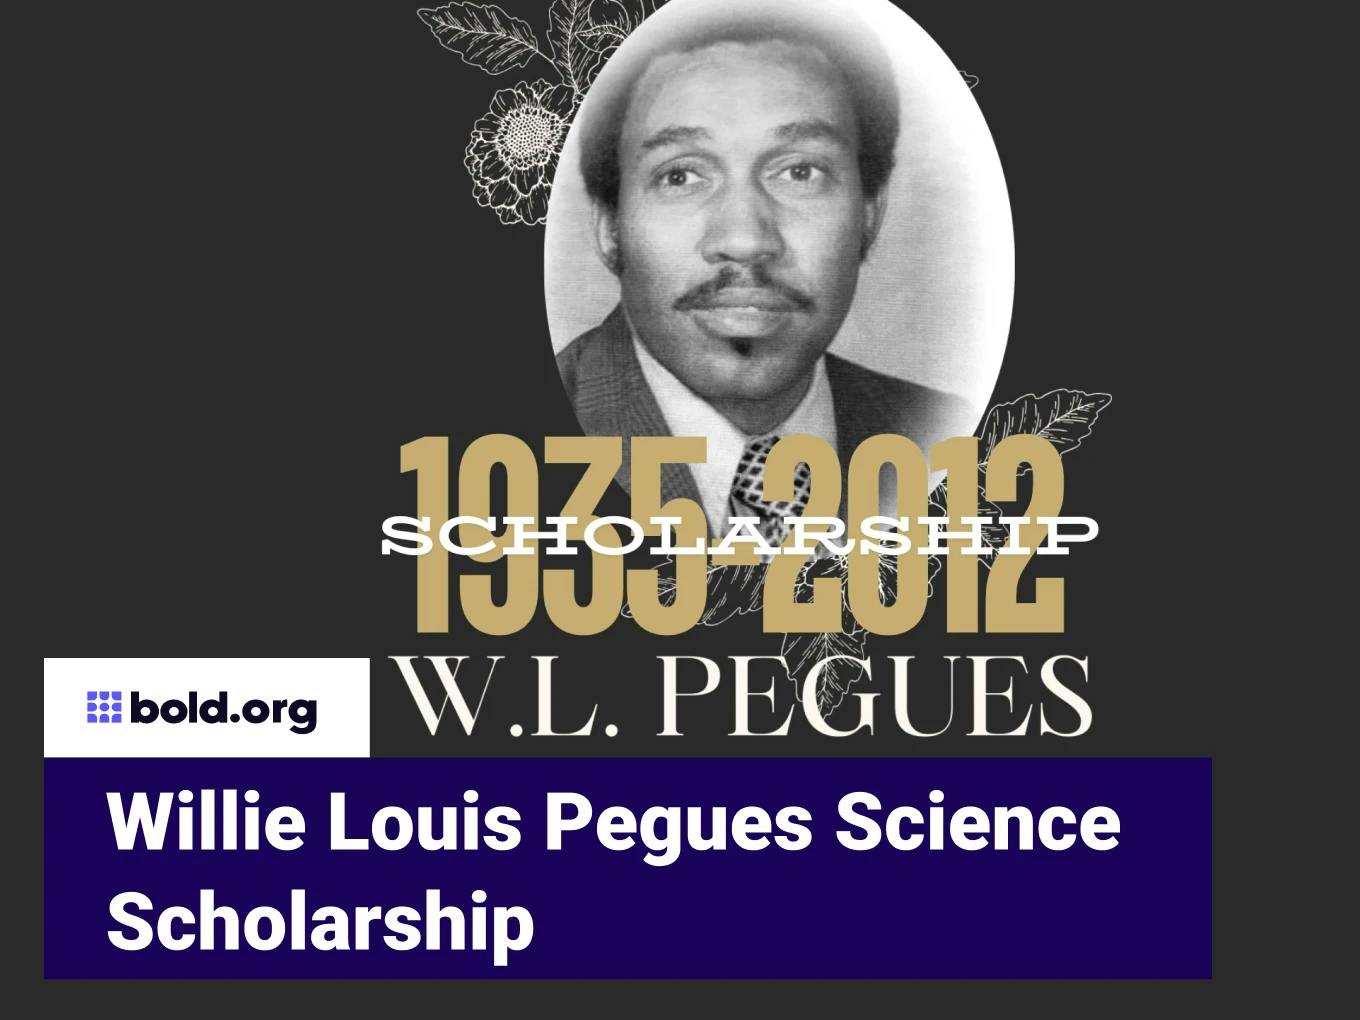 Willie Louis Pegues Science Scholarship